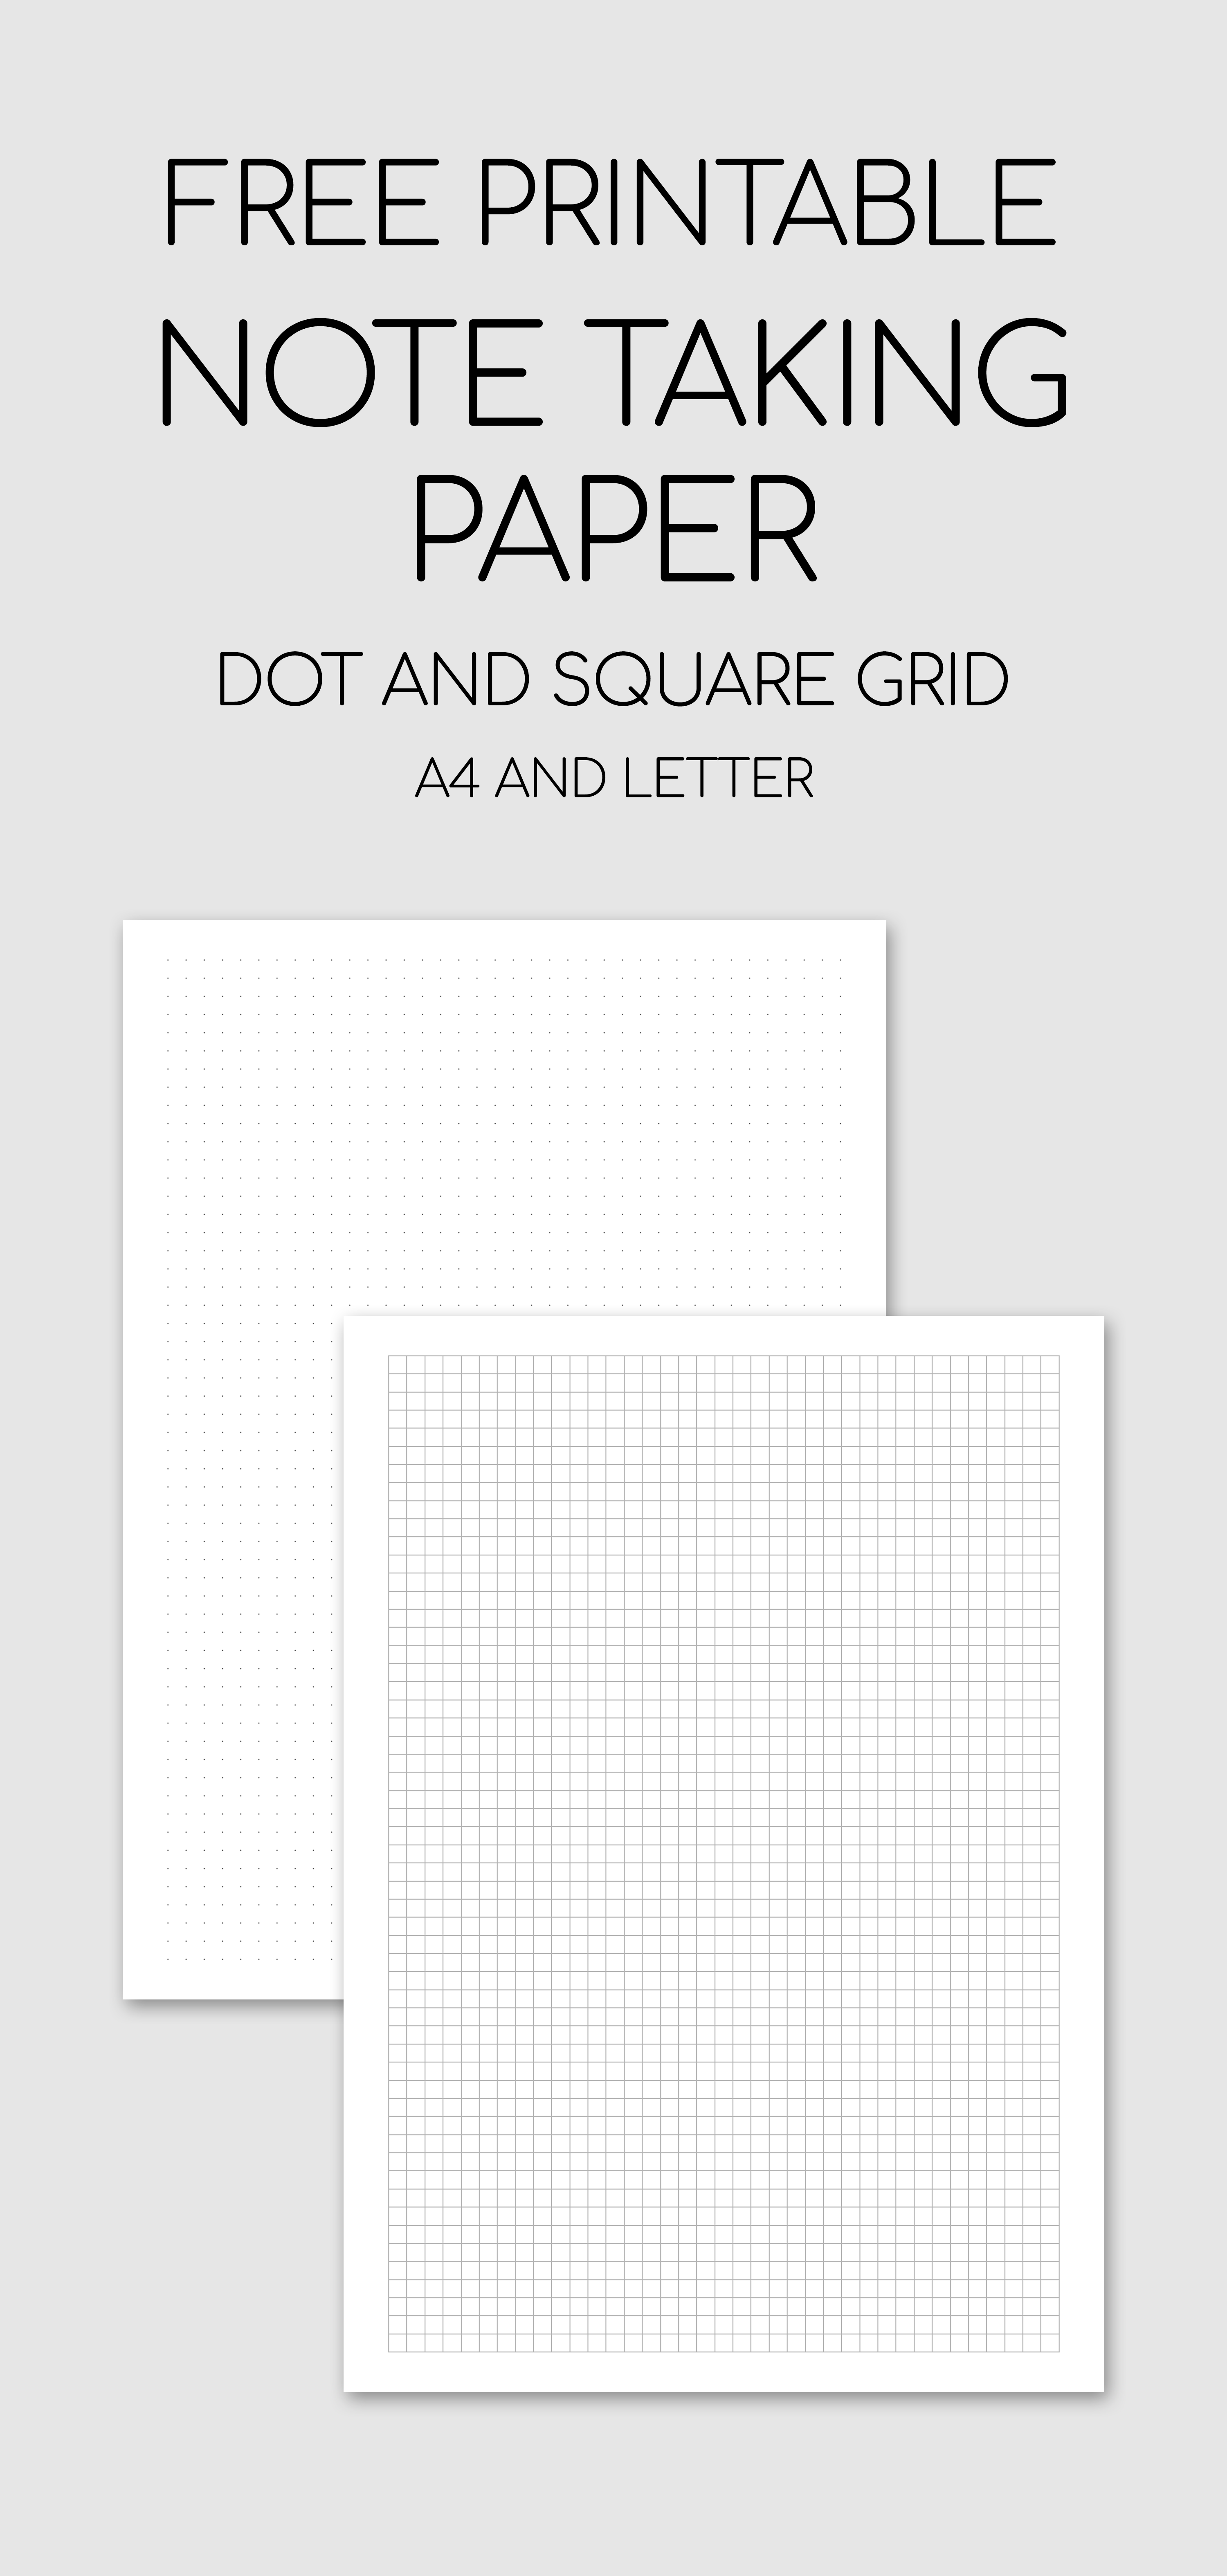 Free Printable Note Taking Paper Dot And Square Grid free printable 